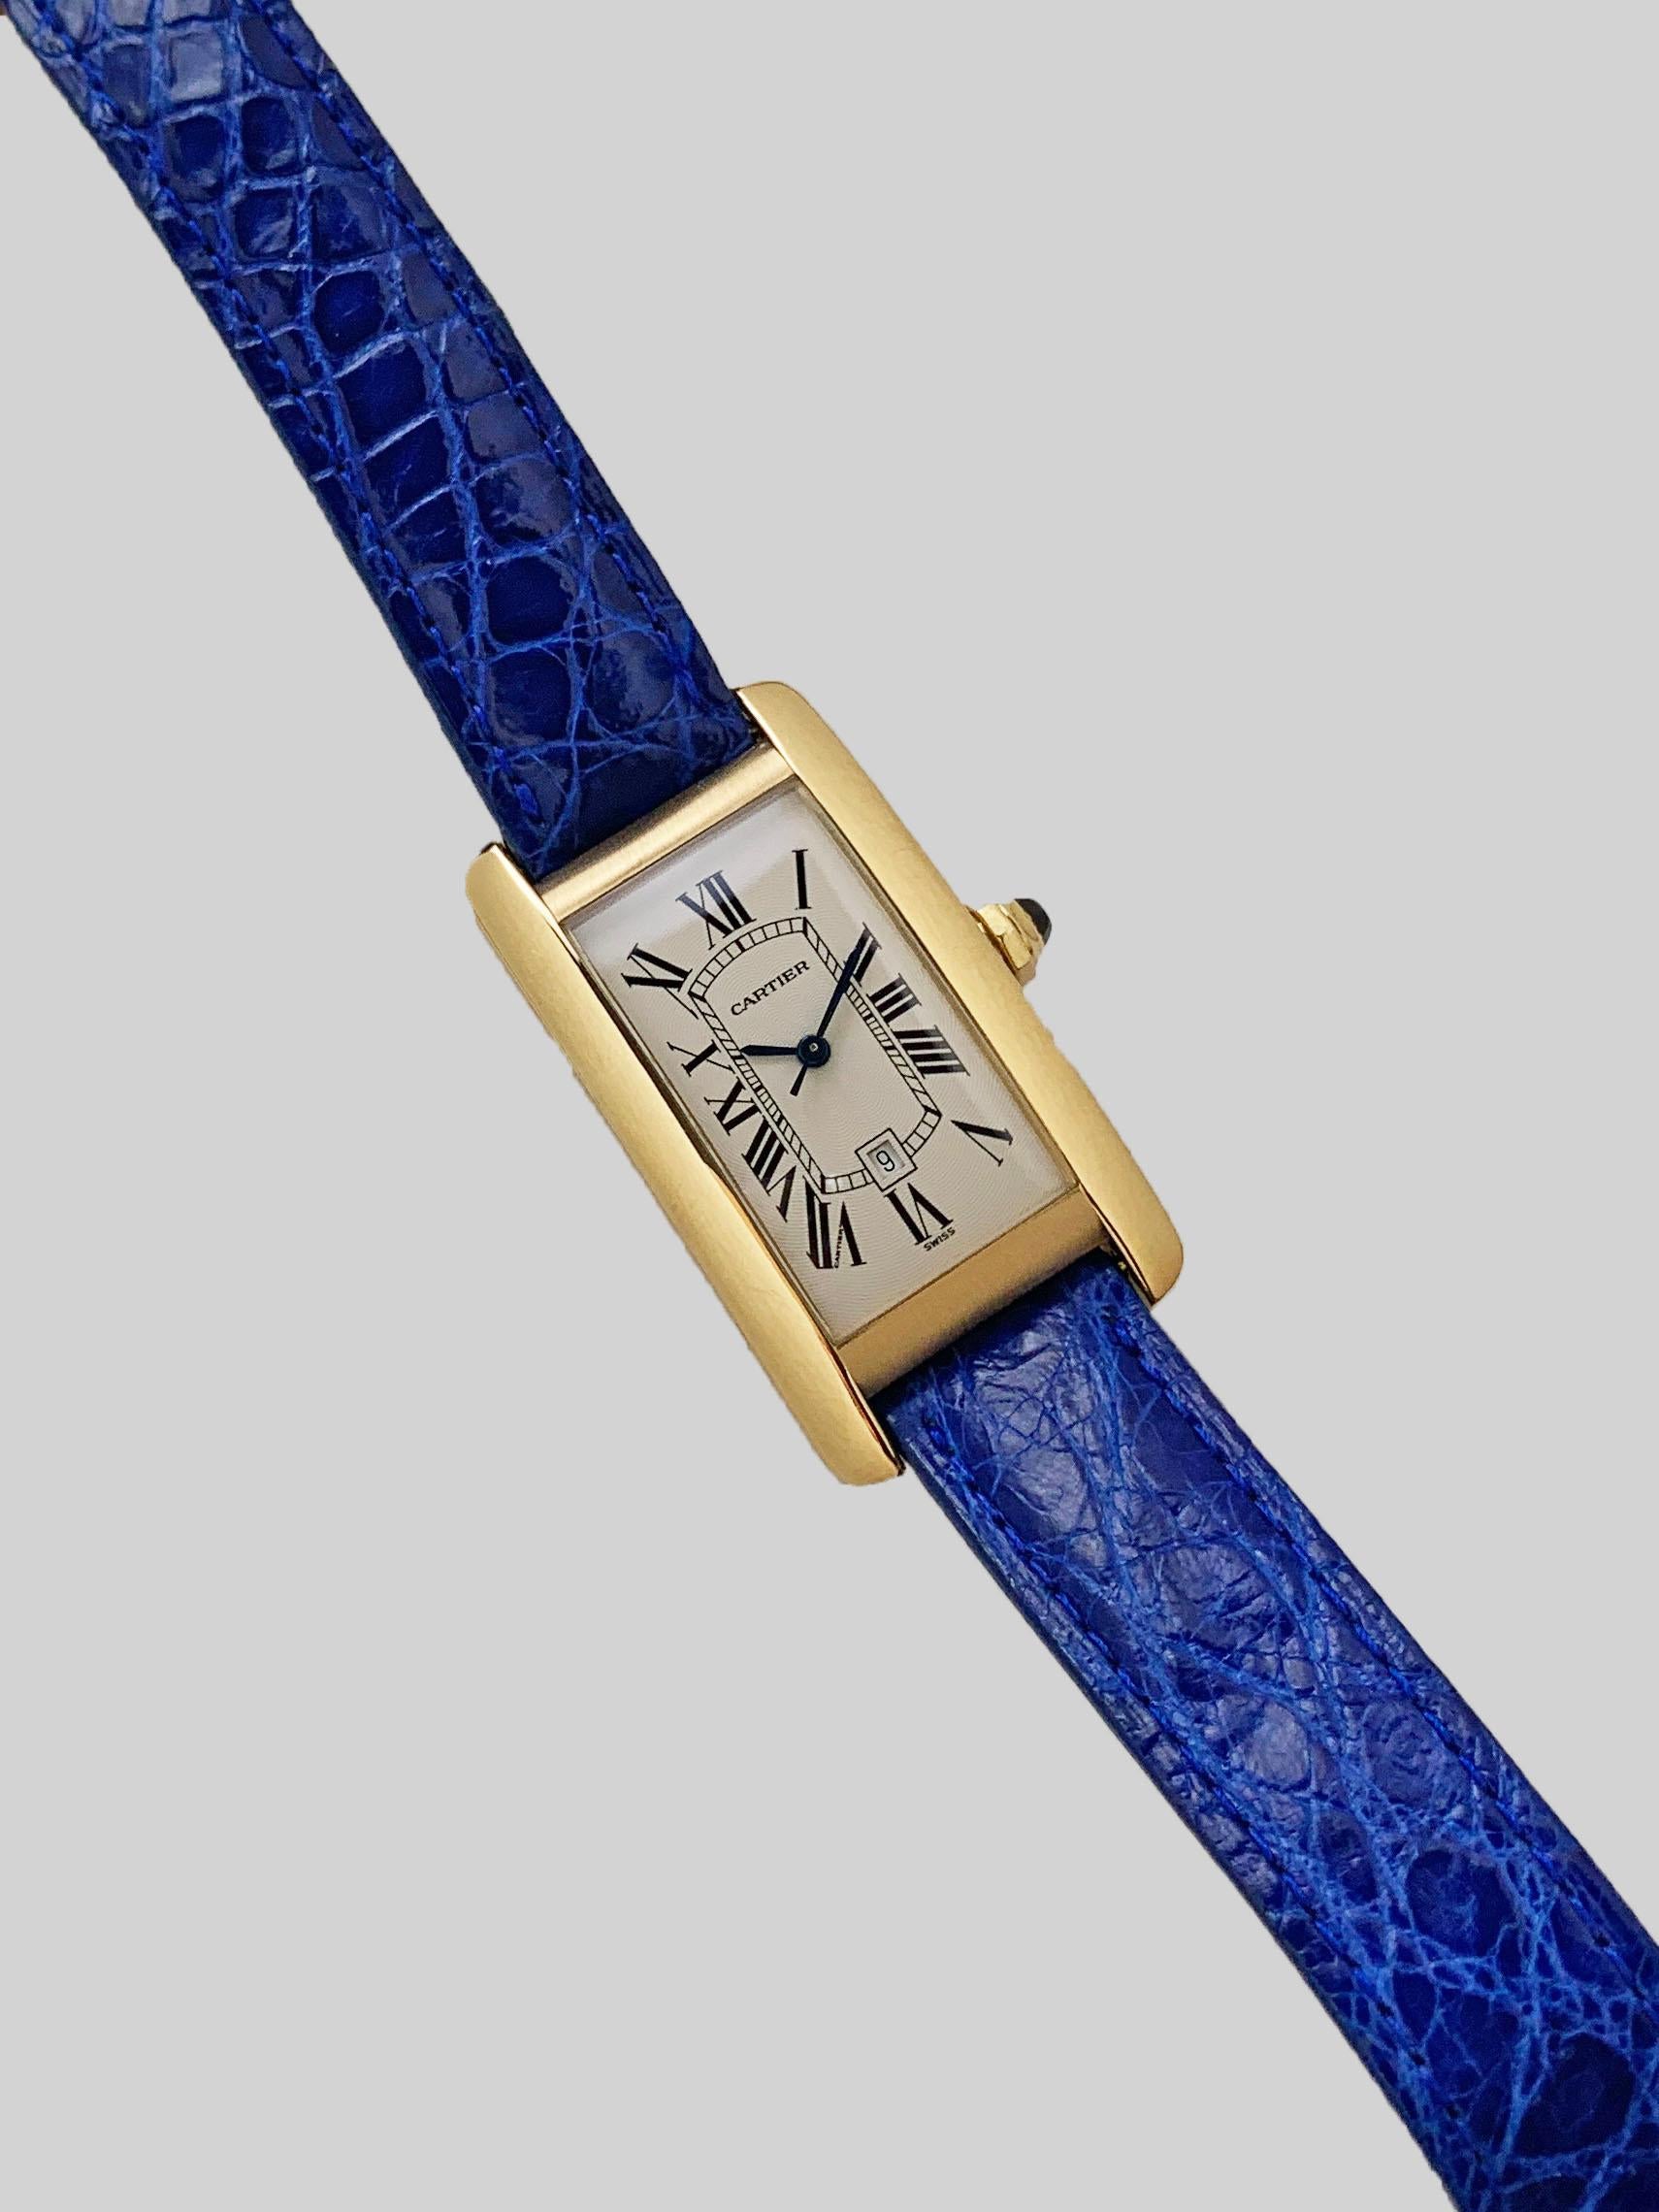 Cartier 18K Yellow Gold Tank Americaine Automatic Watch
Cartier Classic Roman Numeral Dial
Signed and Engraved Case-Back
Signed Cartier Leather Strap
23mm x 42mm
Original Signed Cartier 18K Yellow Gold Deployment Clasp
One Year Warranty on Movement